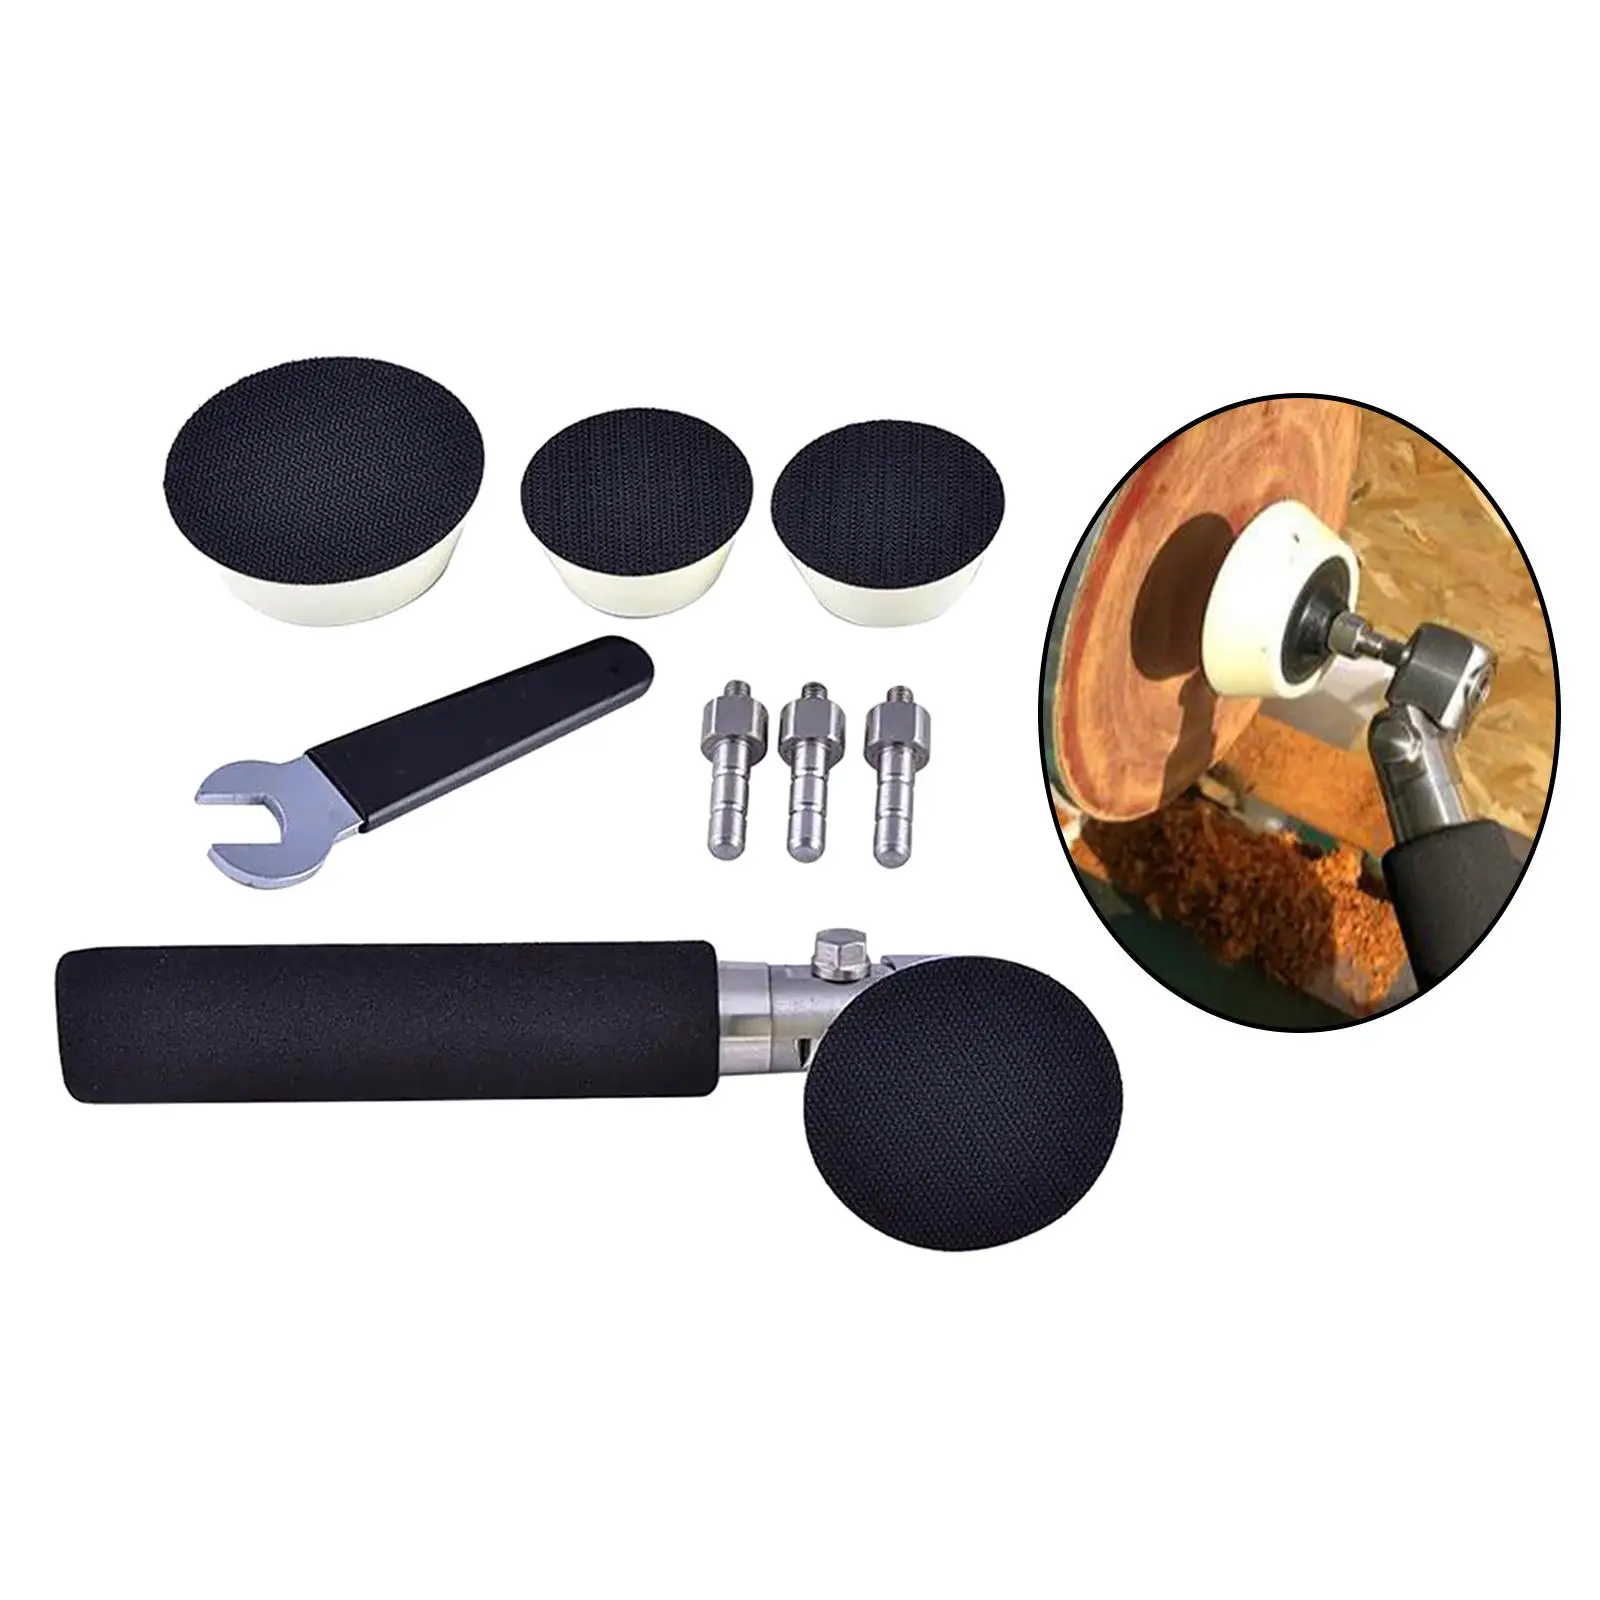 Rotary Polisher Kit Handheld Lightweighted Portable Rotatable Woodworking Accessories Universal Polishing Tool for DIY Fine Work